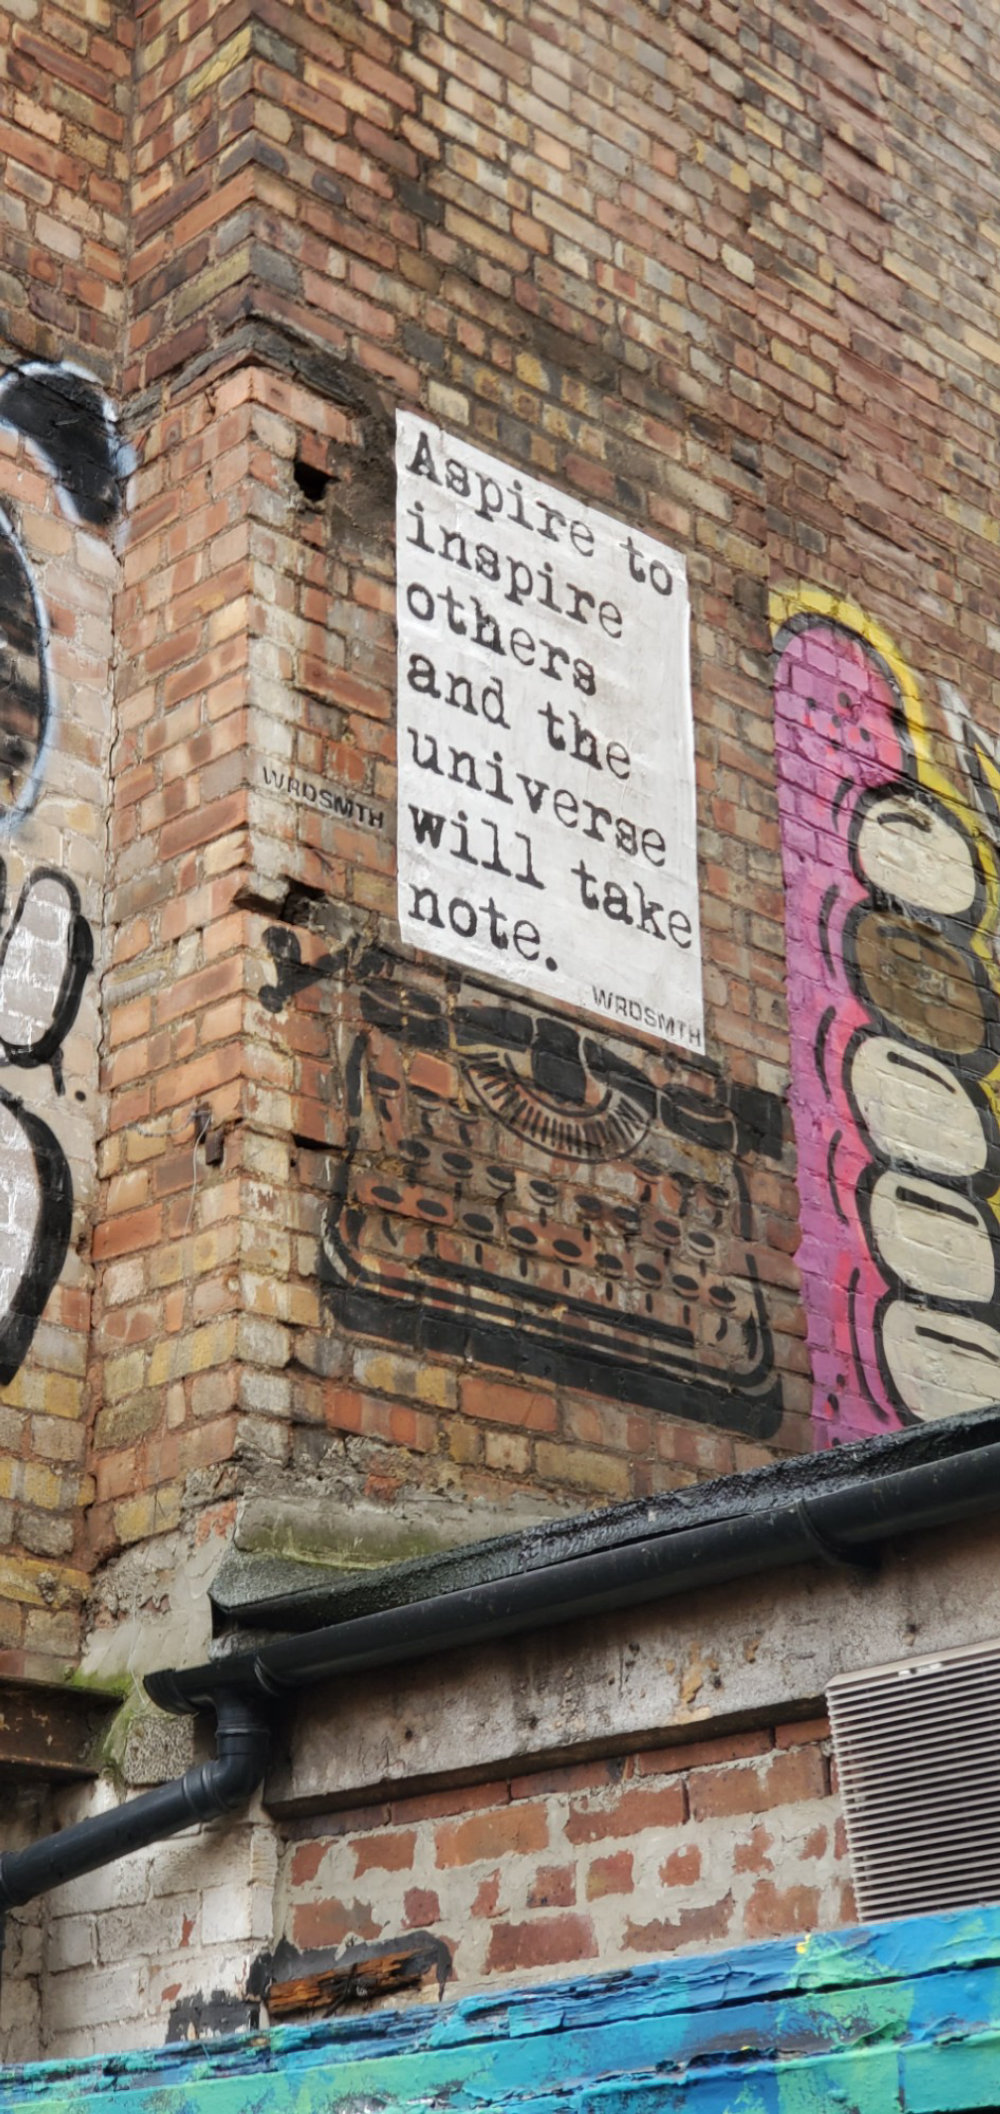 mural in London by artist WRDSMTH.